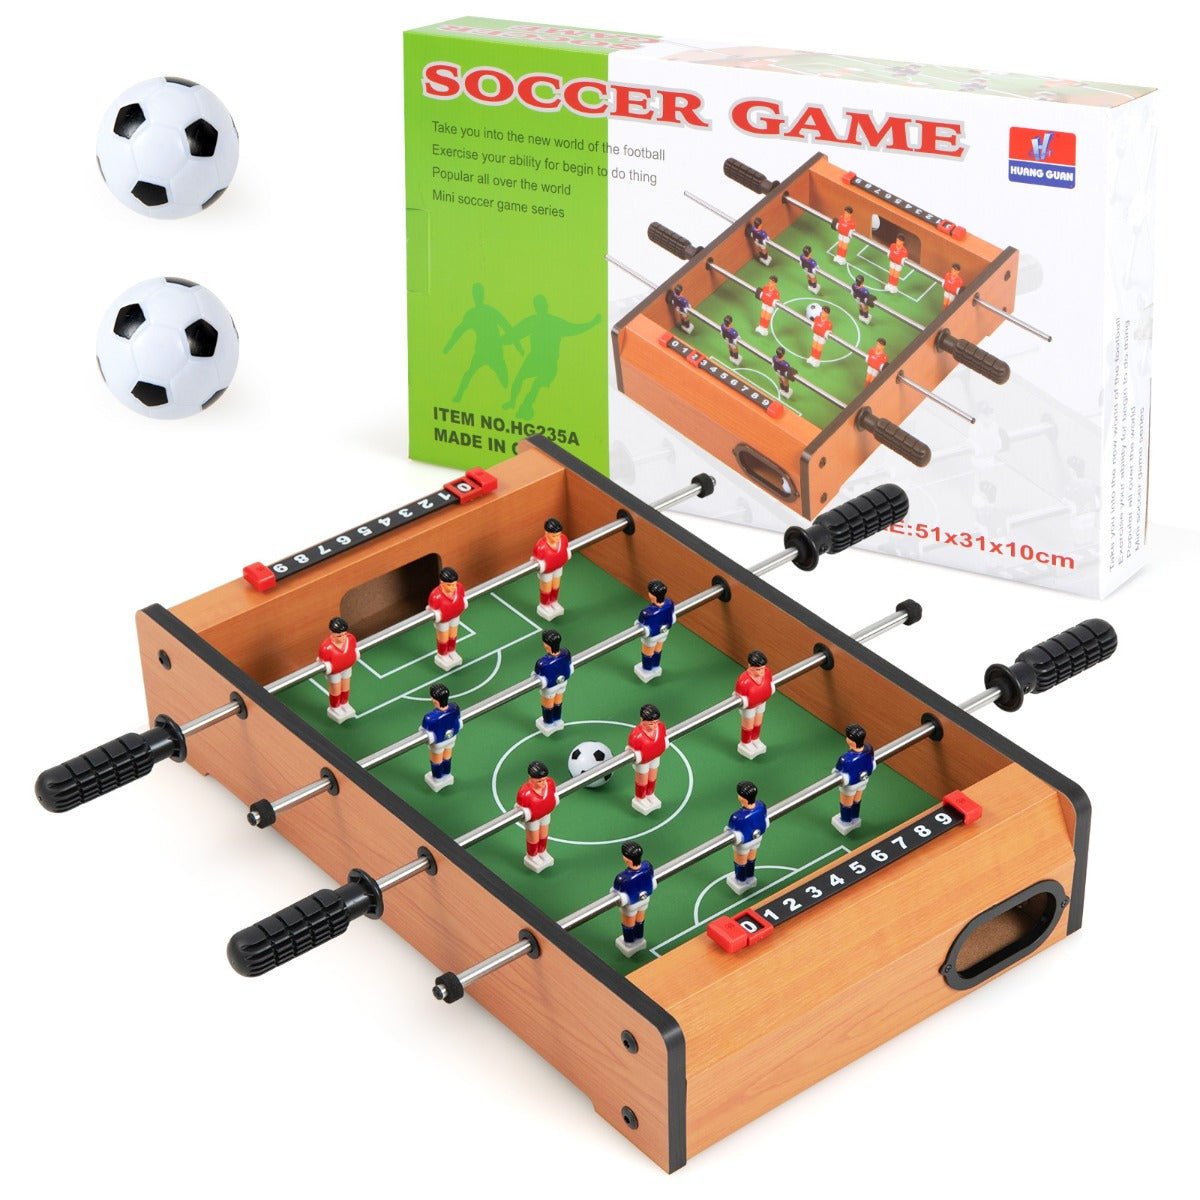 Mini Foosball Table Soccer Game - Compact Entertainment for Game Rooms